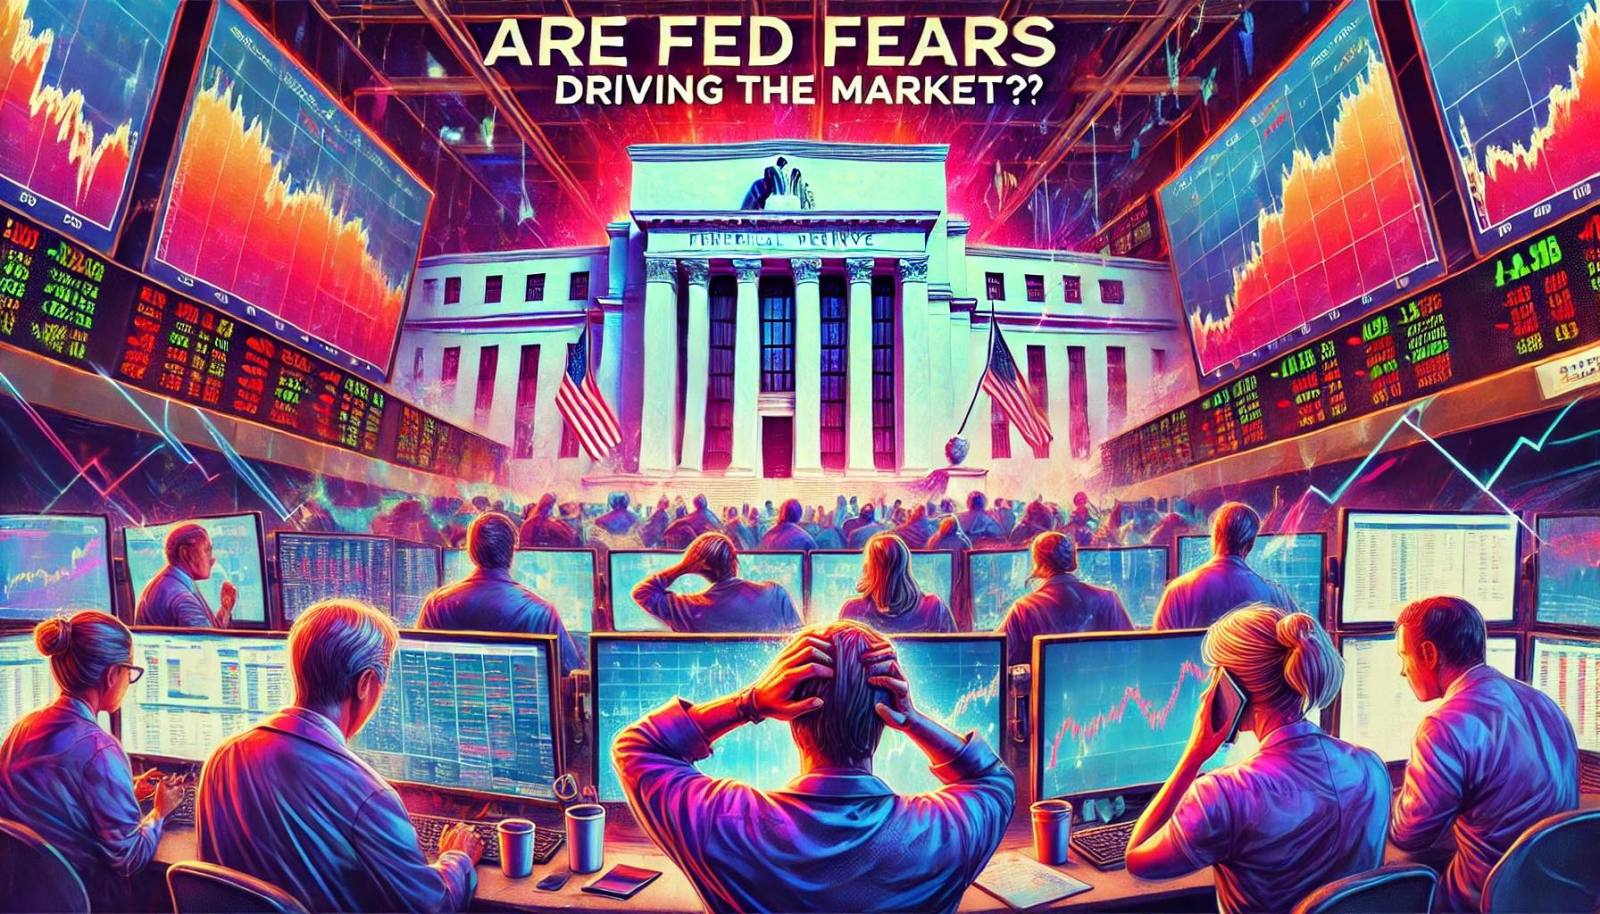 Are Fed Fears Driving the Market?